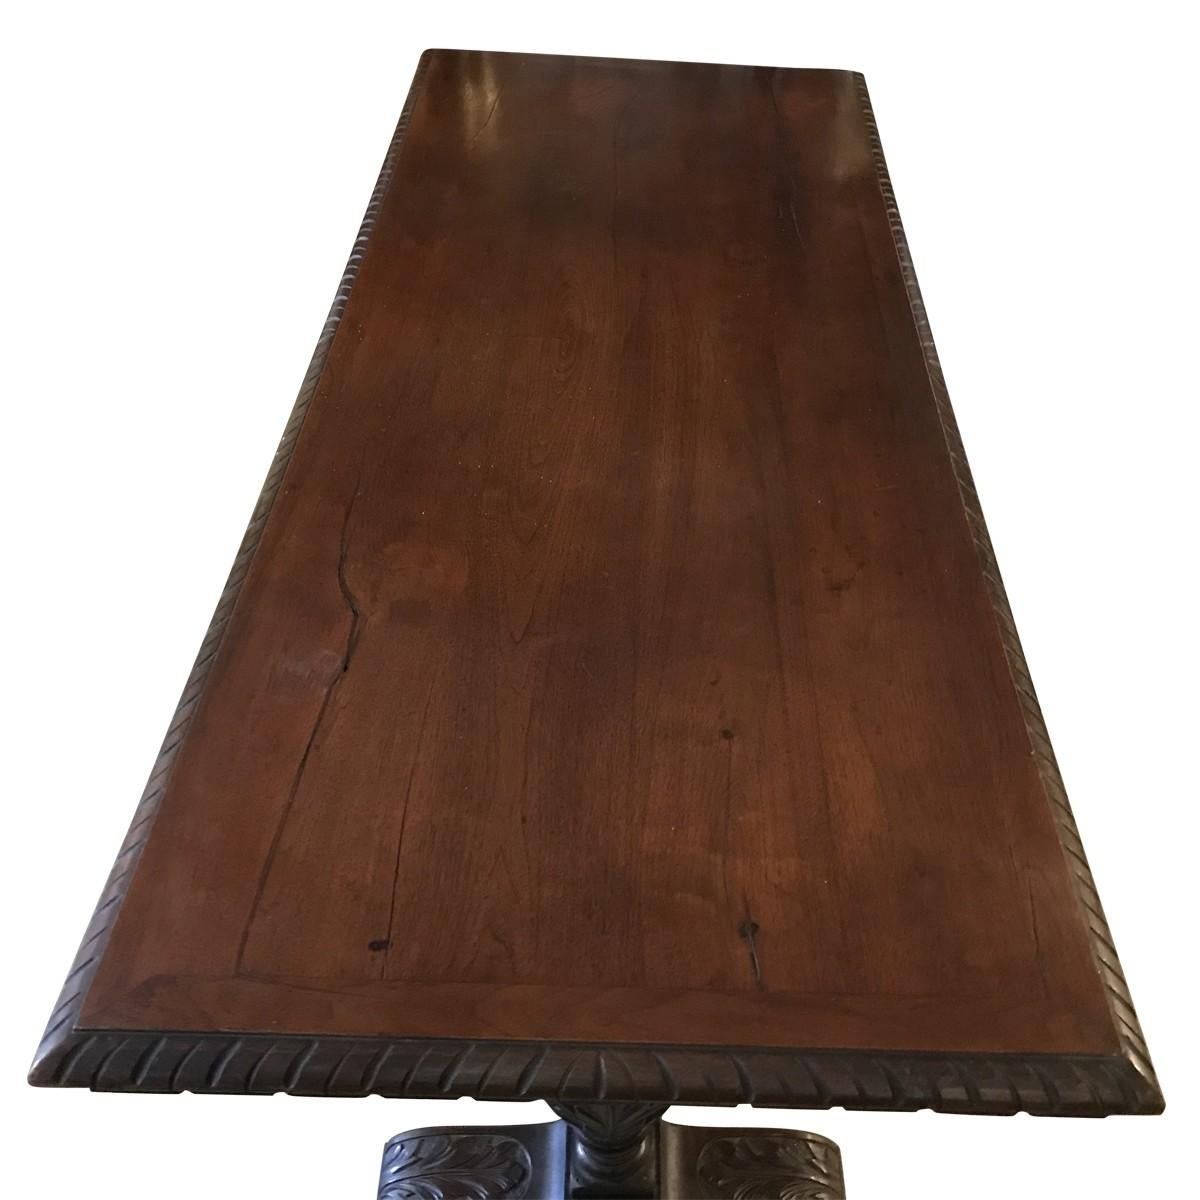 Traditional furniture is perfect for home designers looking to create a comfortable and timeless sophistication in their households. Rendered in solid walnut, this Renaissance style carved refectory table is a stunning piece. It features a fully